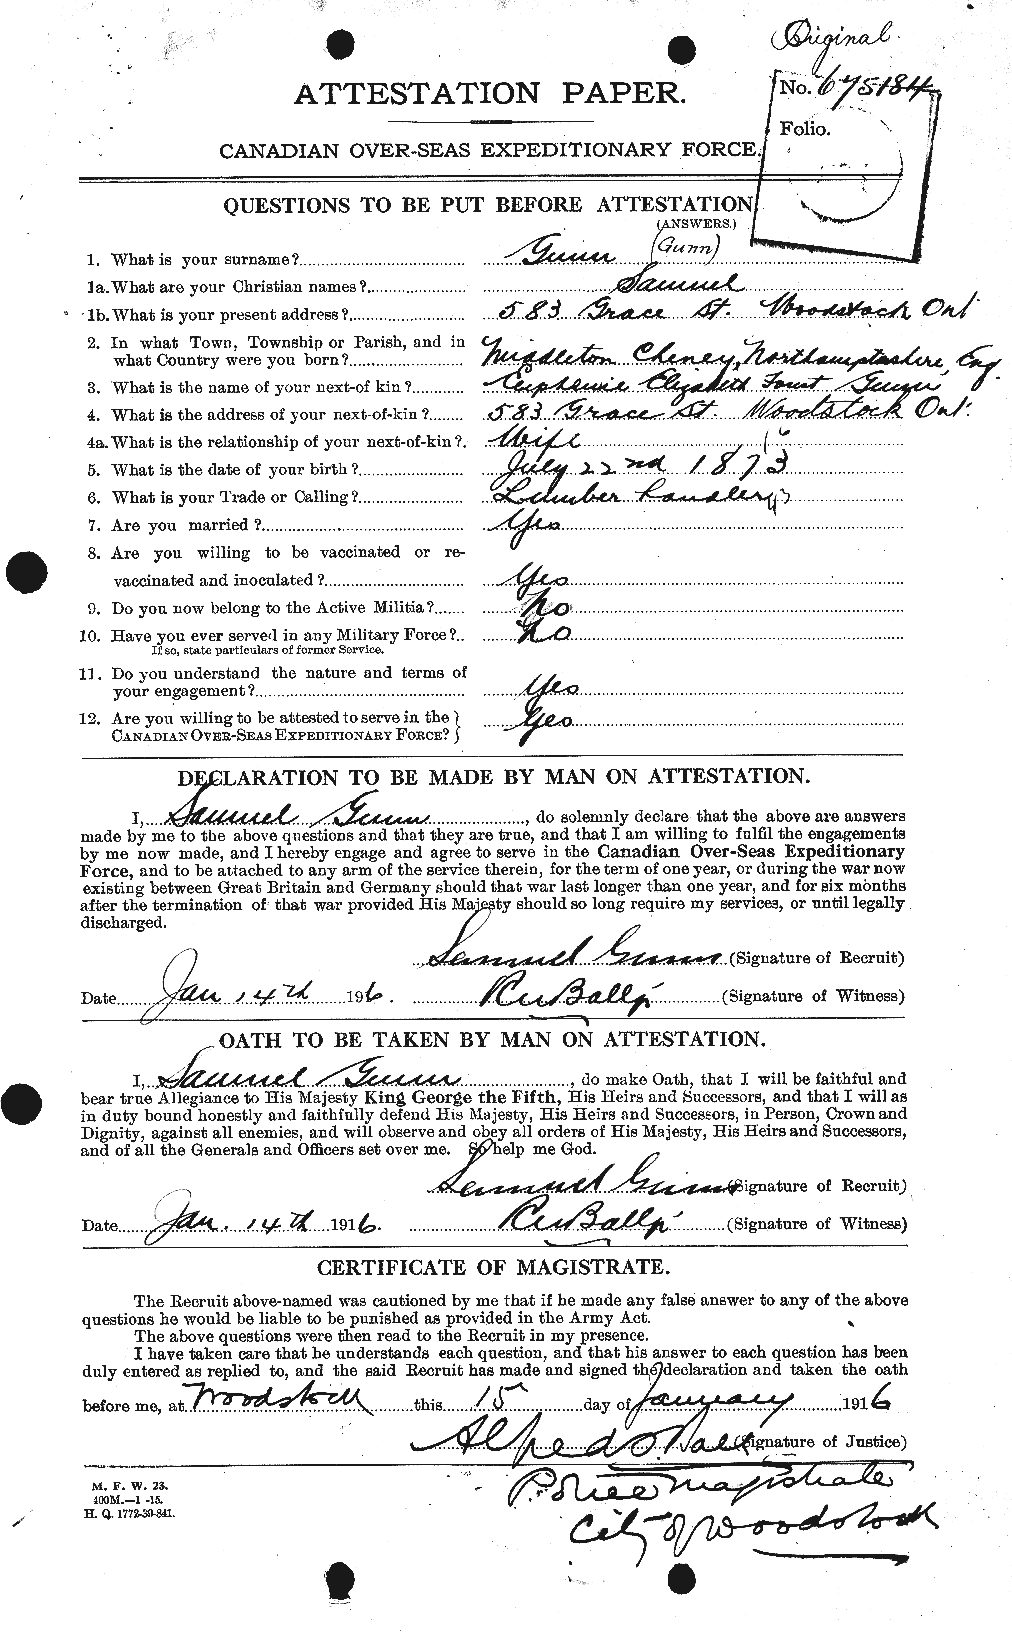 Personnel Records of the First World War - CEF 369330a